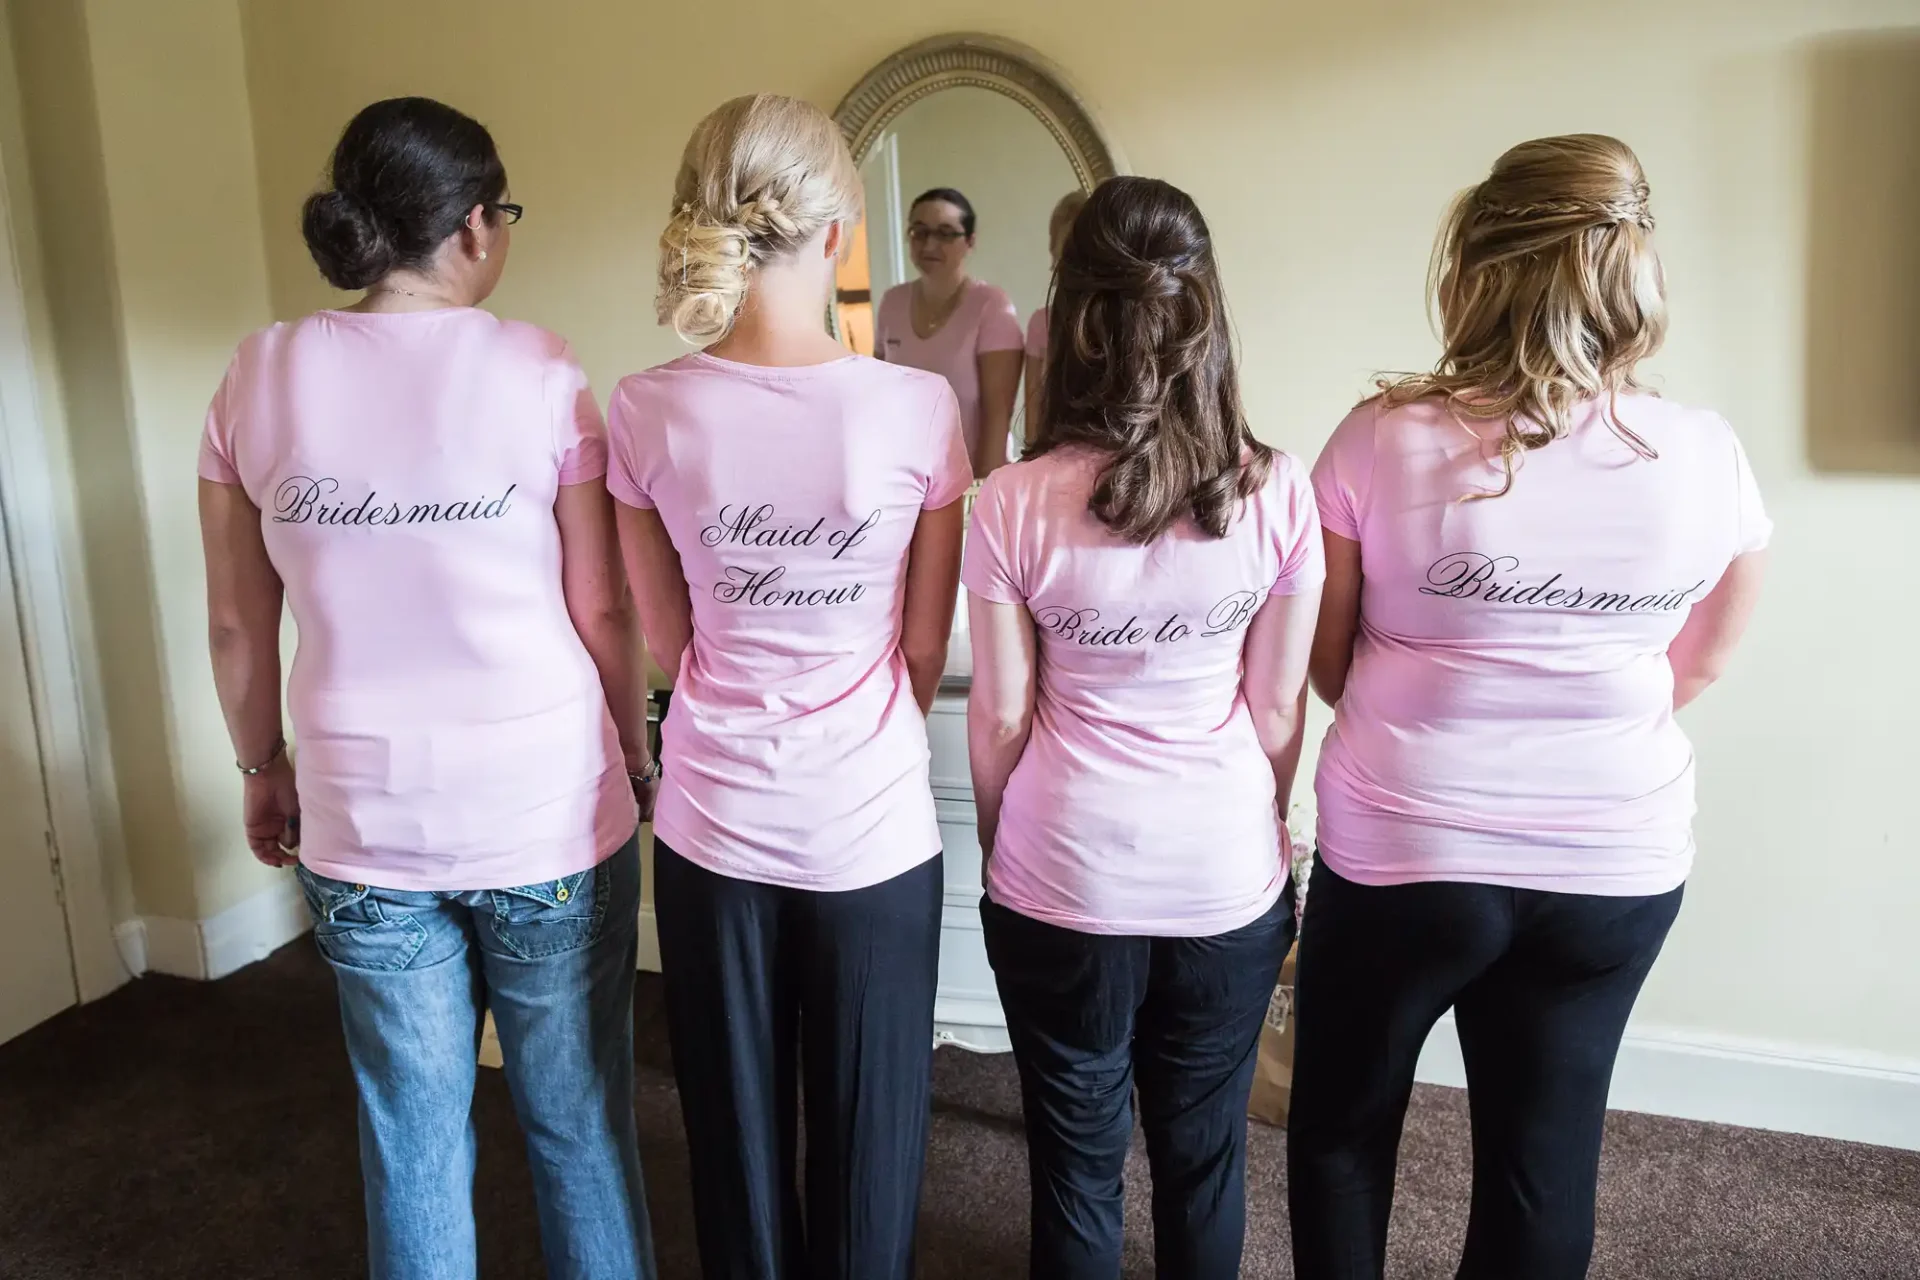 Four women stand facing away, wearing pink t-shirts labeled "bridesmaid" and "maid of honour," looking at a mirror reflection.